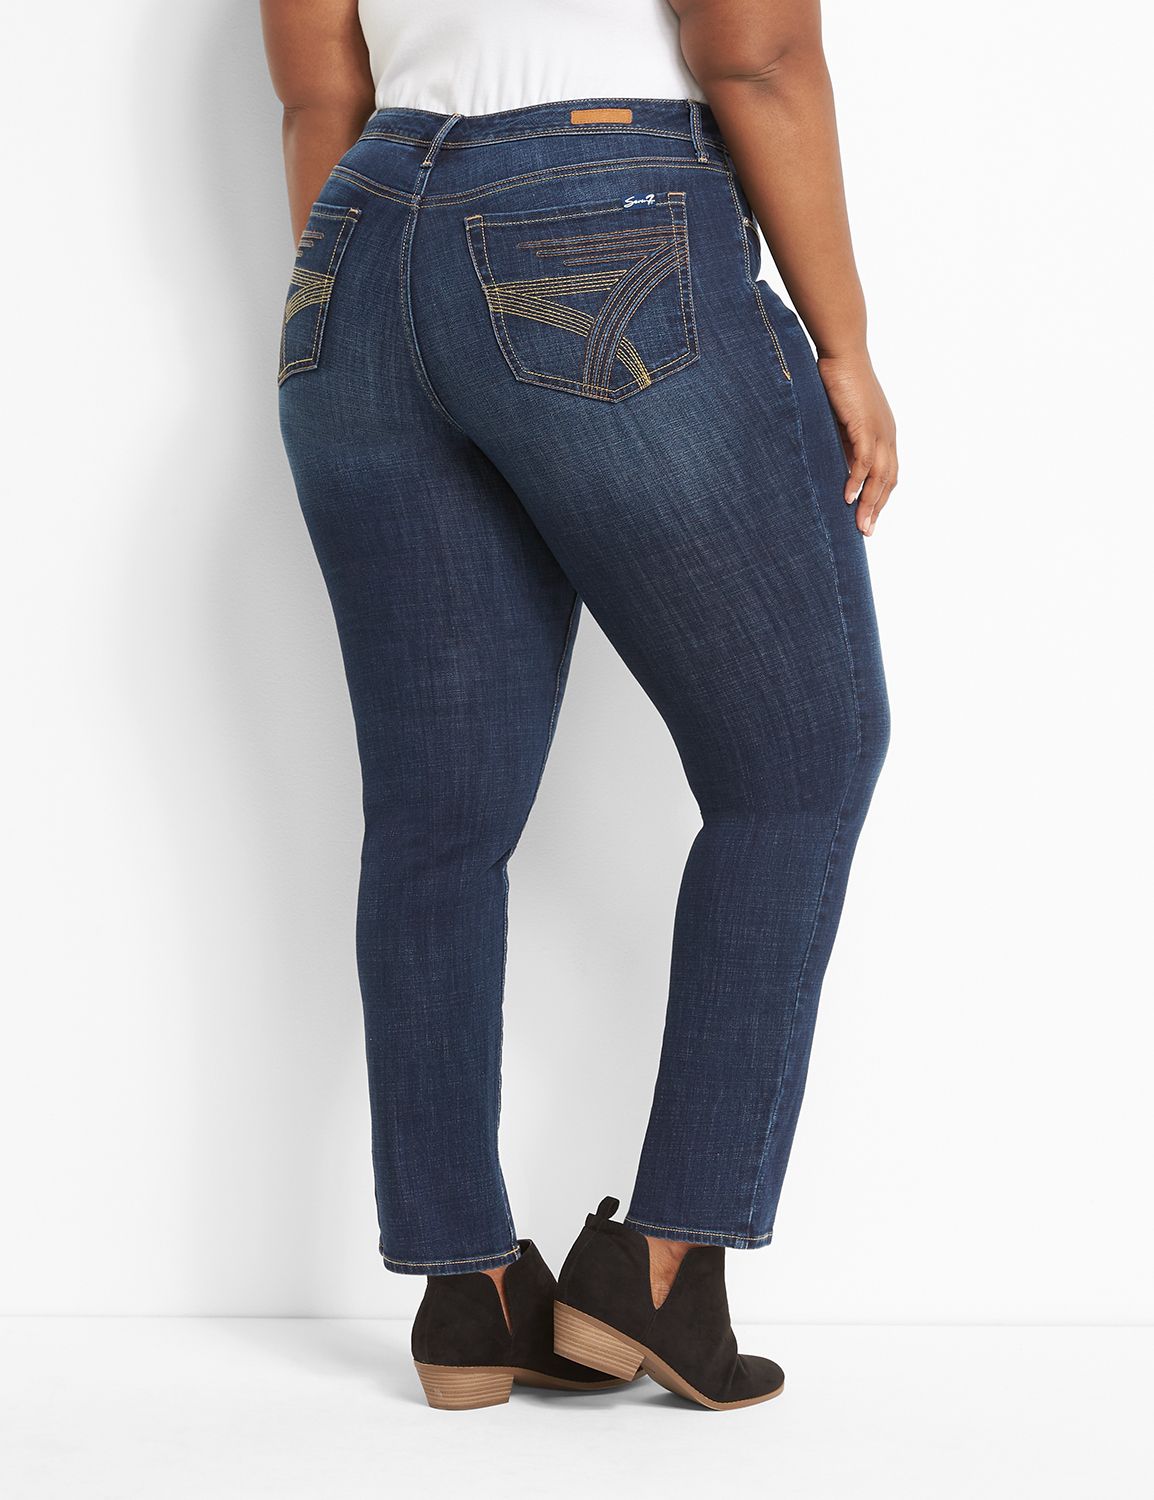 Seven7 Jeans High Rise Ankle Skinny - $17.98 — Sam's Simple Savings